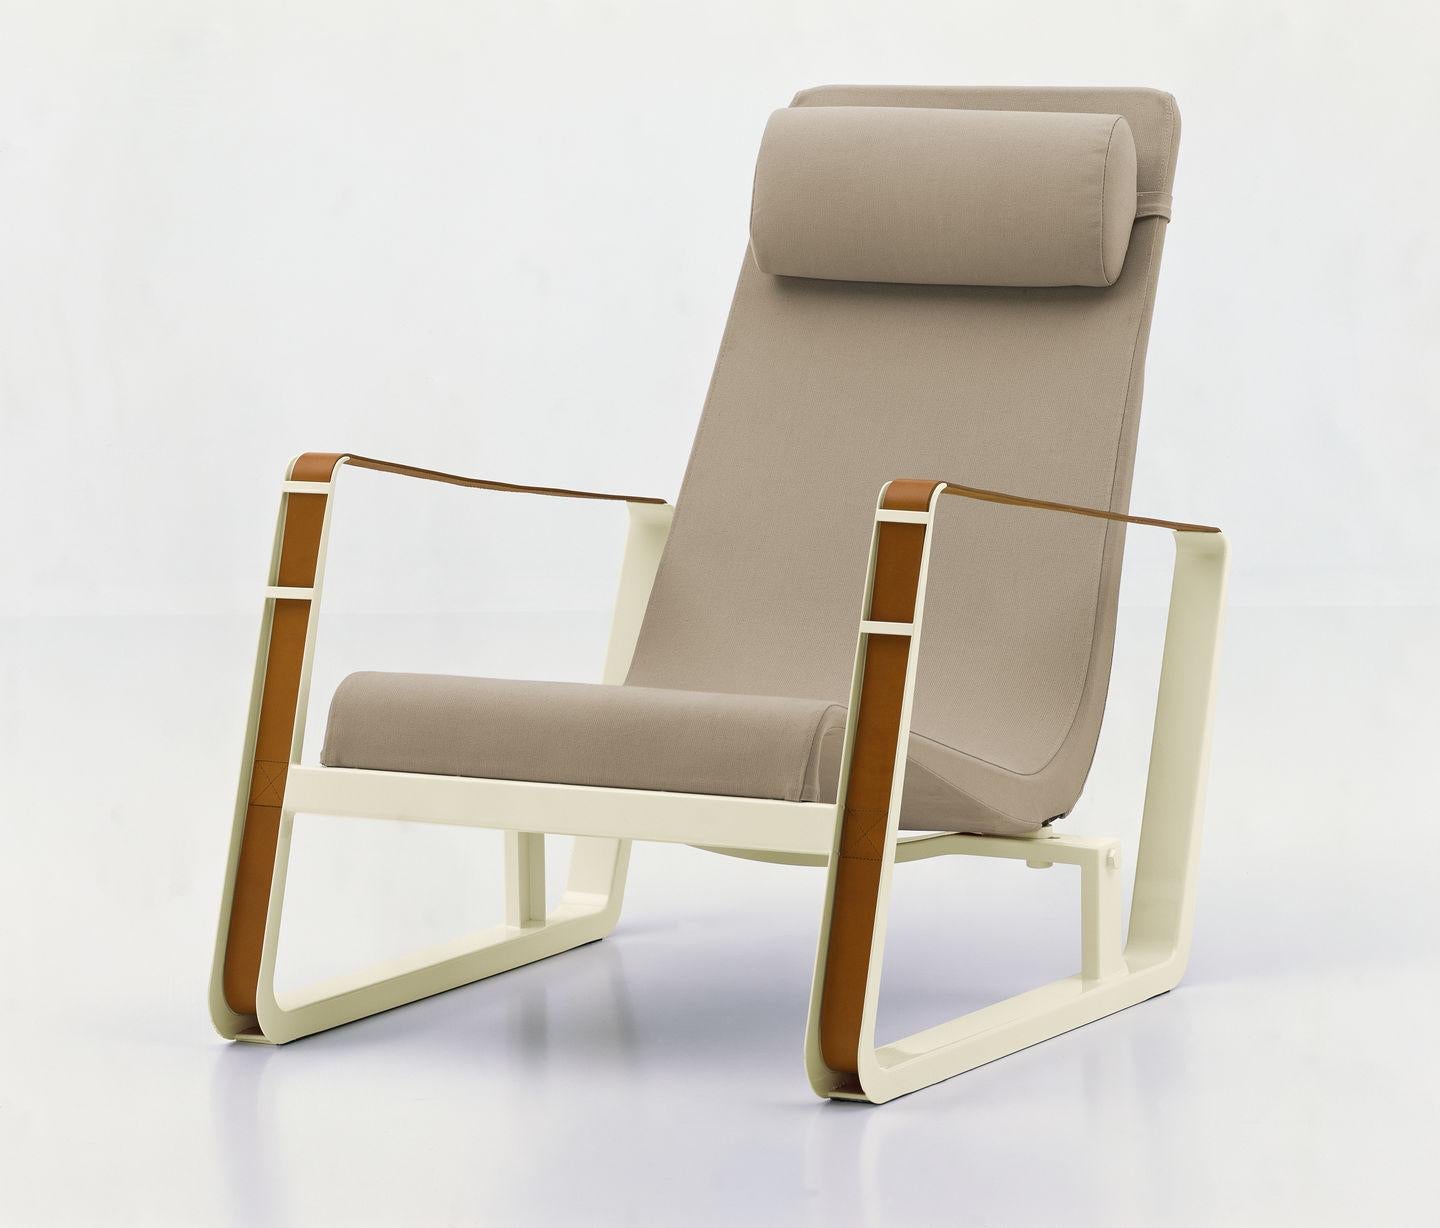 Armchair designed by Jean Prouvé in 194130.
Manufactured by Vitra, Switzerland.

Designed for a competition to furnish the student residence halls at the Cité Universitaire in Nancy, the Cité armchair is one of Jean Prouvé's early masterpieces.